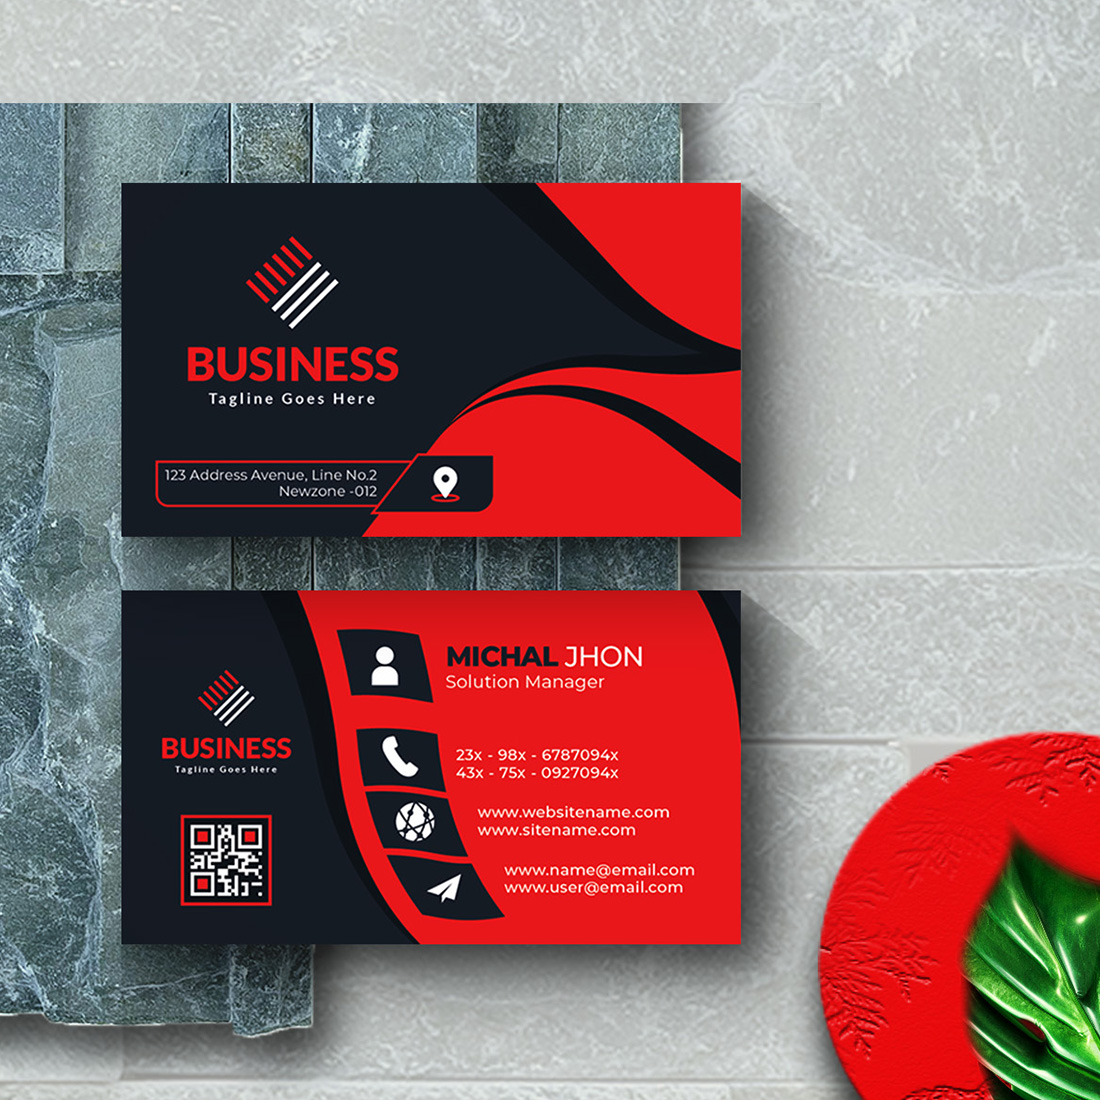 Corporate Red and Dark Modern Business Card Design Template main cover.